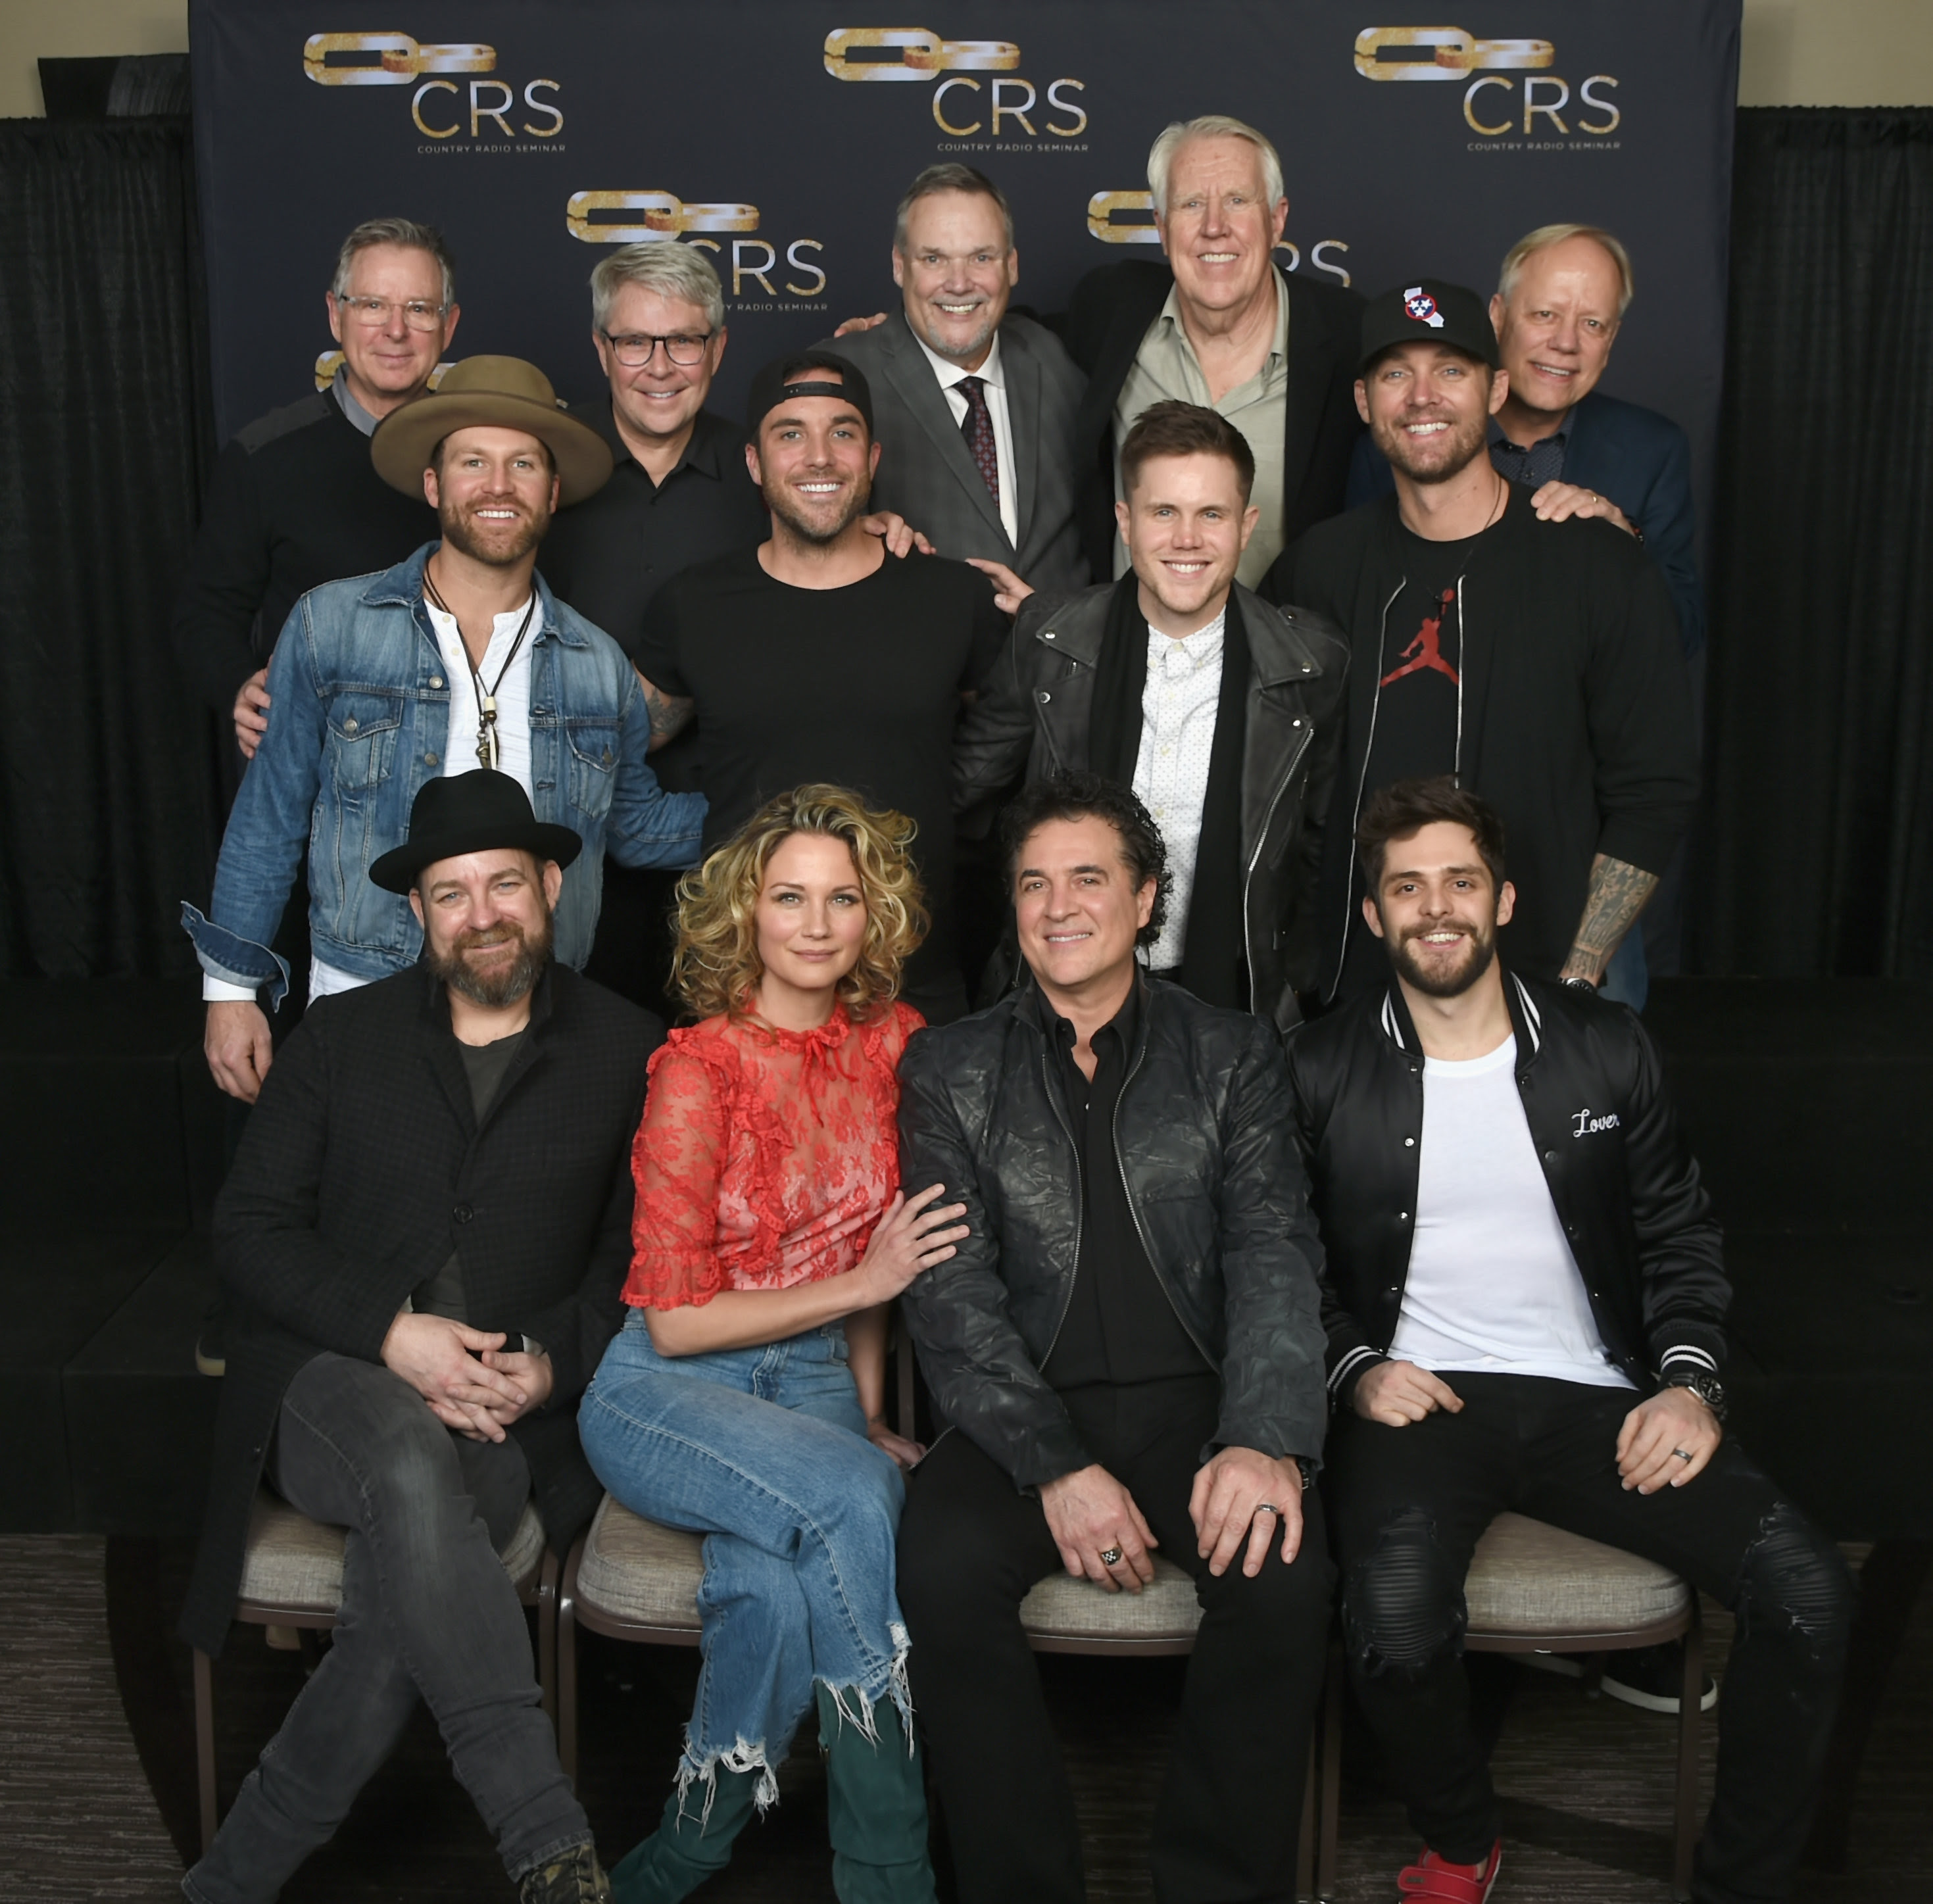 Everything That Went Down at the Big Machine Label Group CRS Luncheon